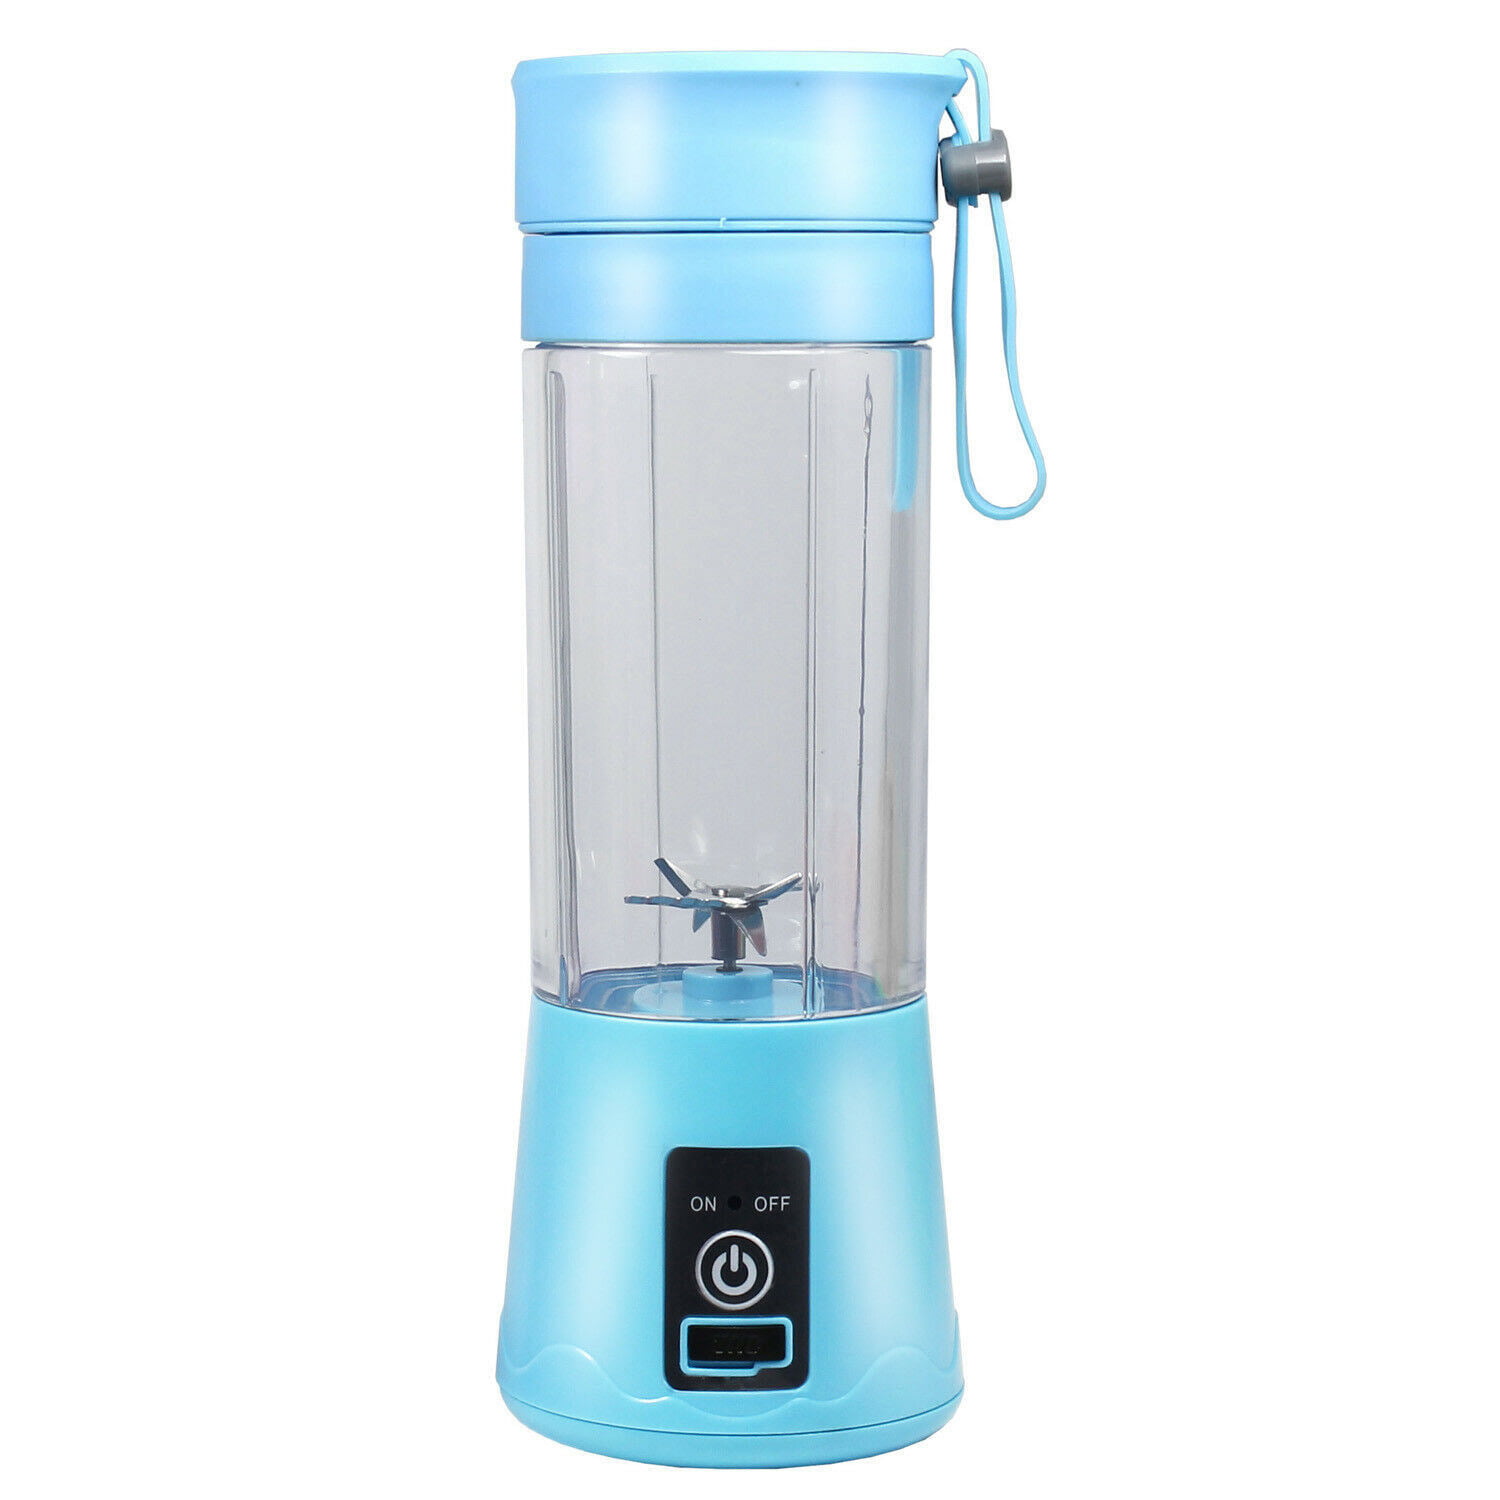 Bluethuy 500ml Electric Juicer Powerful Blender One-button Start Large  Capacity Small Juice Cup Mini Juicer USB Rechargeable Blender Home Supplies